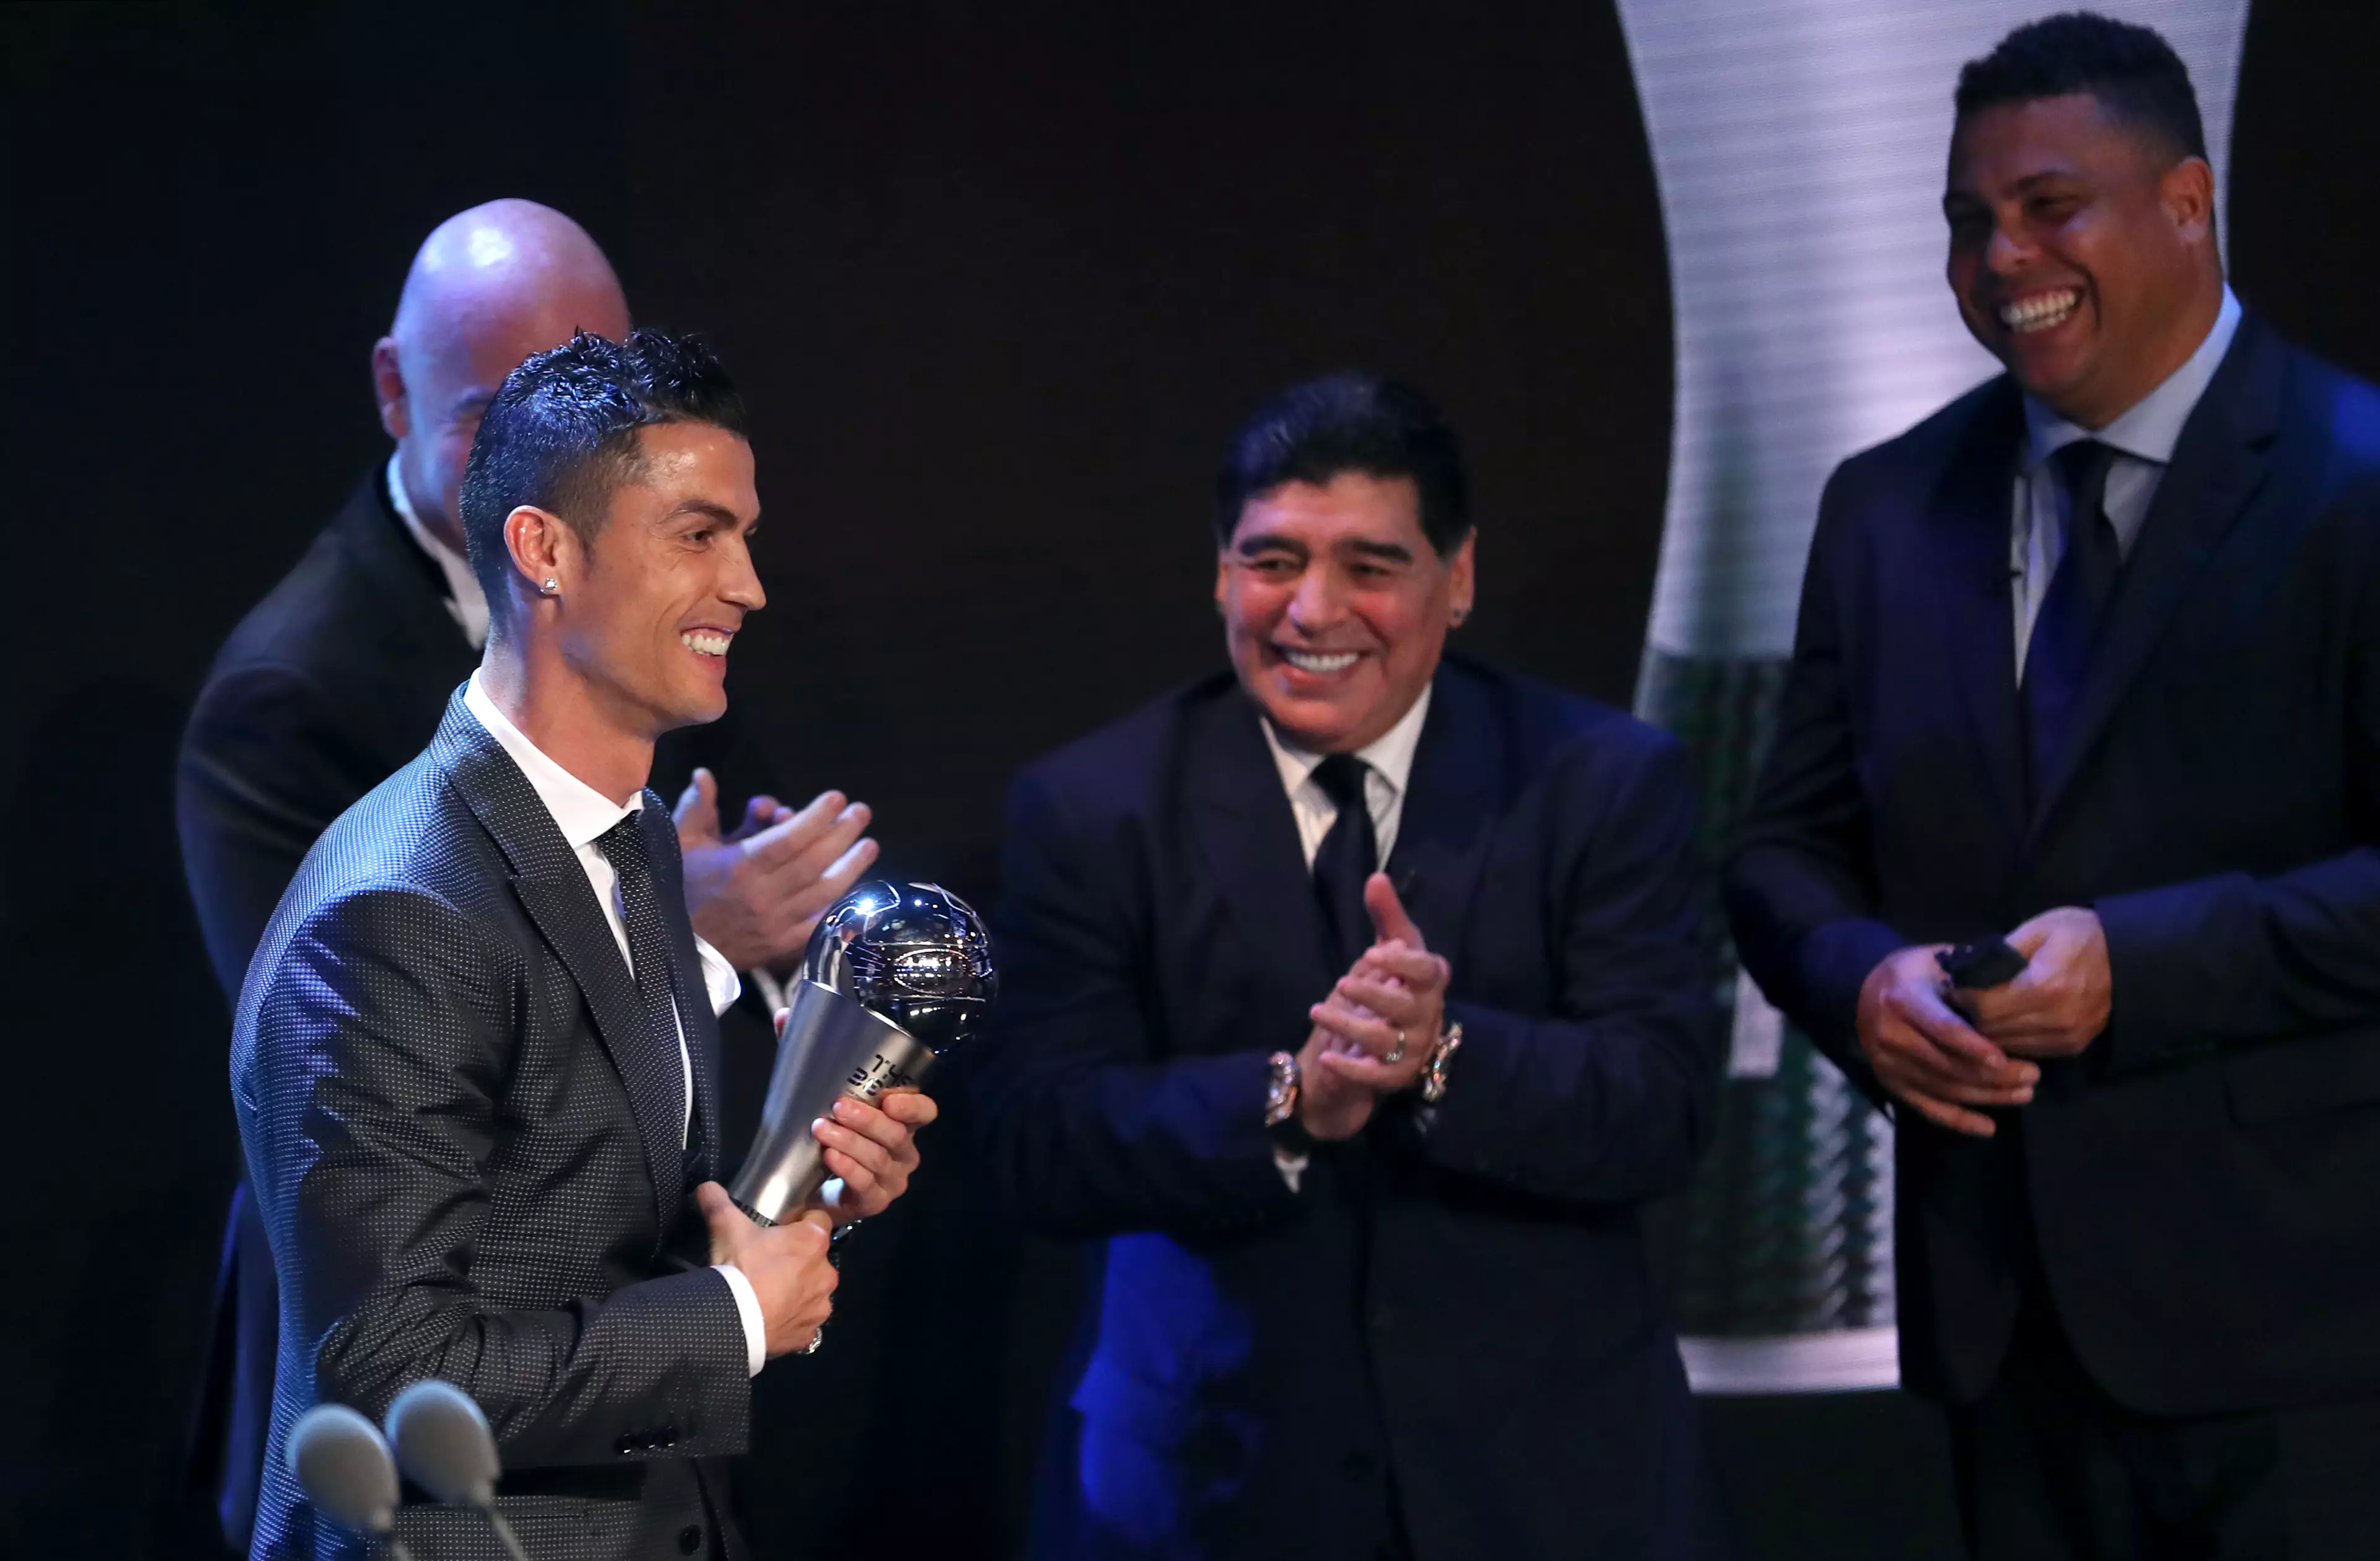 Ronaldo with his 2017 'The Best' award. Image: PA Images